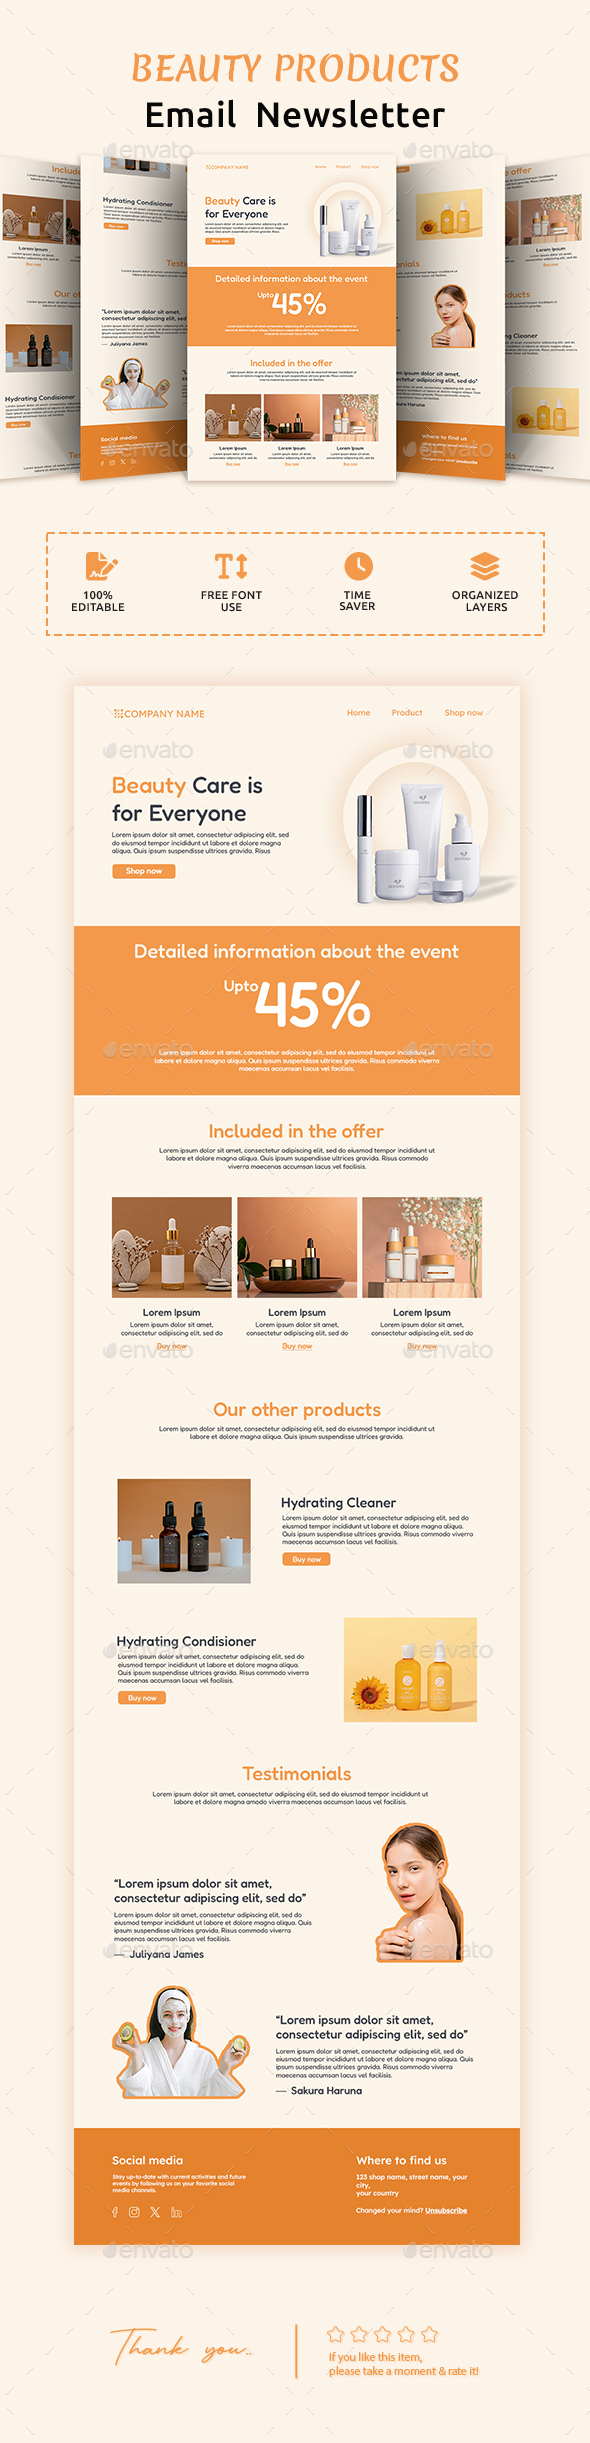 [DOWNLOAD]Beauty Care Email Newsletter PSD Template